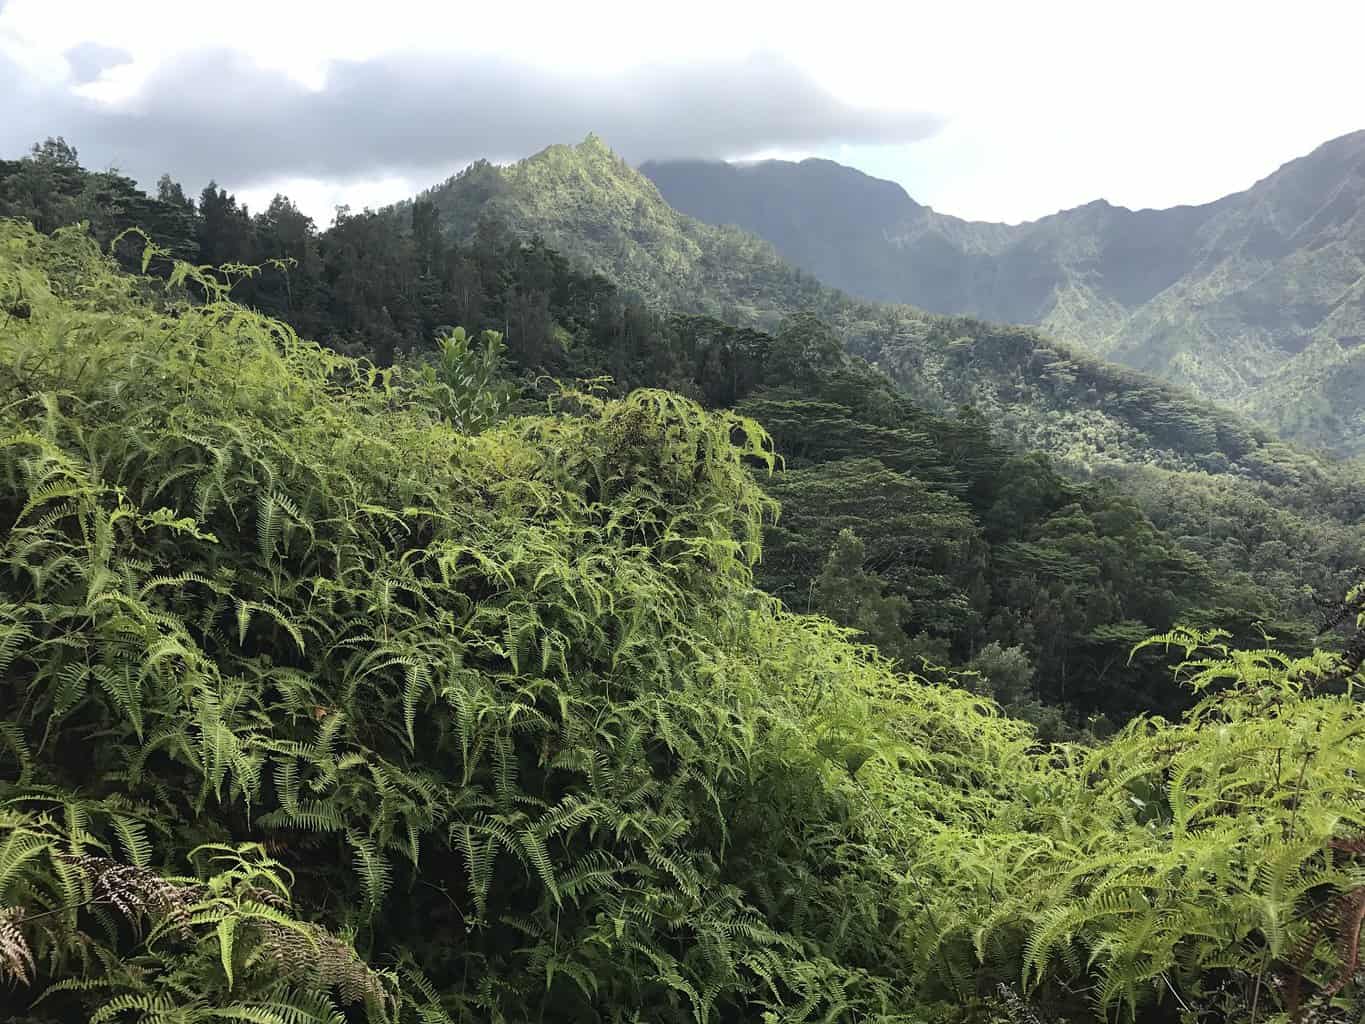 Hikers Rescued on Hanalei Mountain Trail